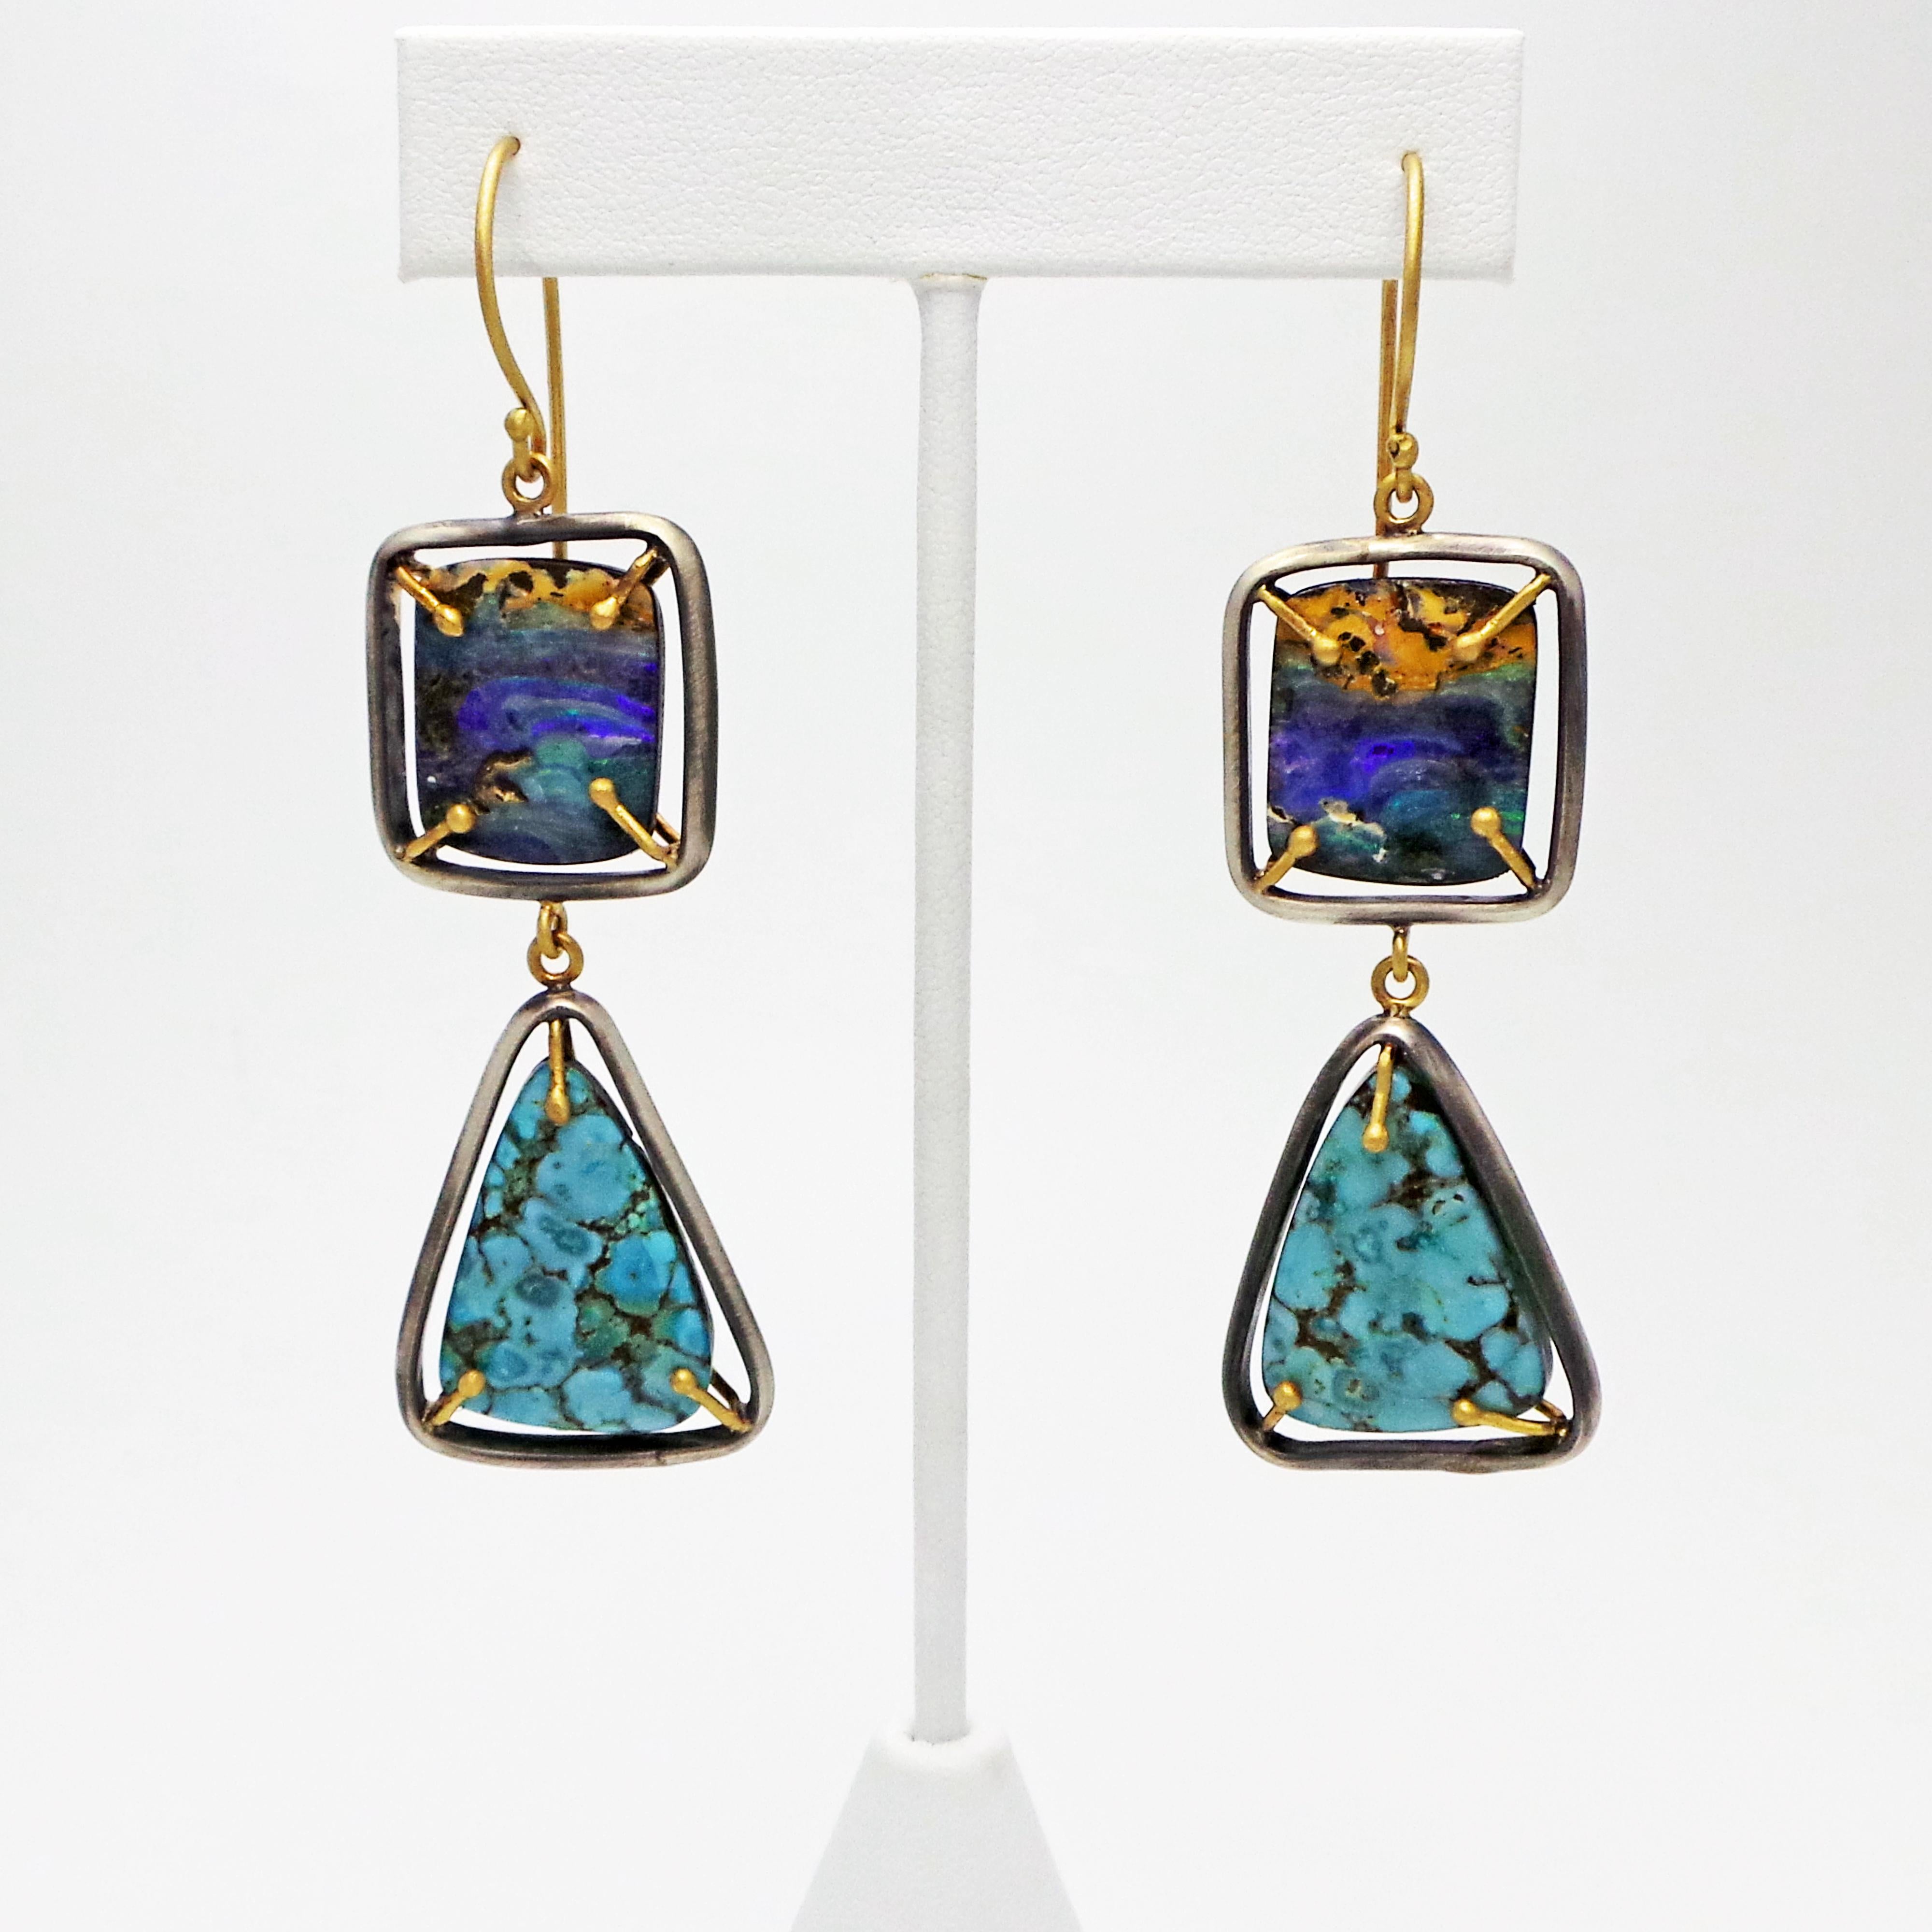 Stunning Australian Boulder Opal and Carico Lake turquoise (from the closed mine in Nevada, USA) set in hand-fabricated, oxidized sterling silver with 18k yellow gold accent prongs and French wire two-tone dangle earrings. One-of-a-kind, unique pair